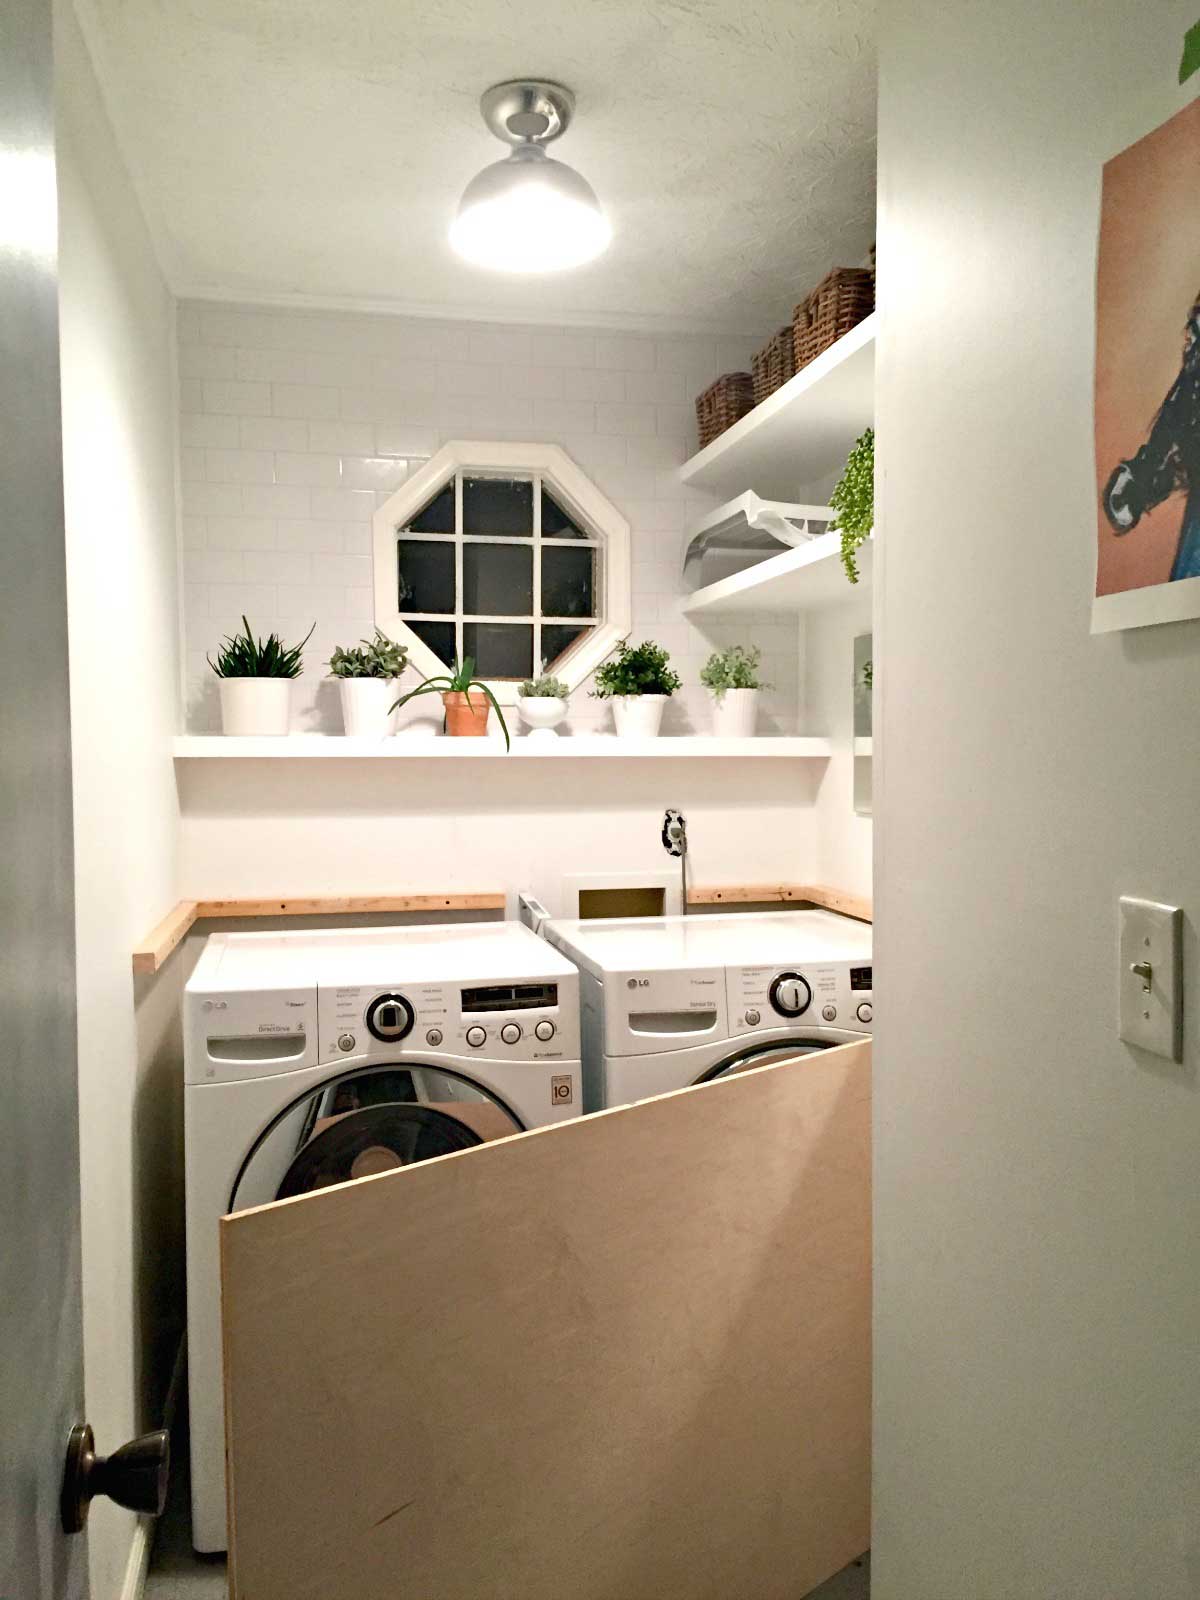 Need deep countertop for over washer/dryer